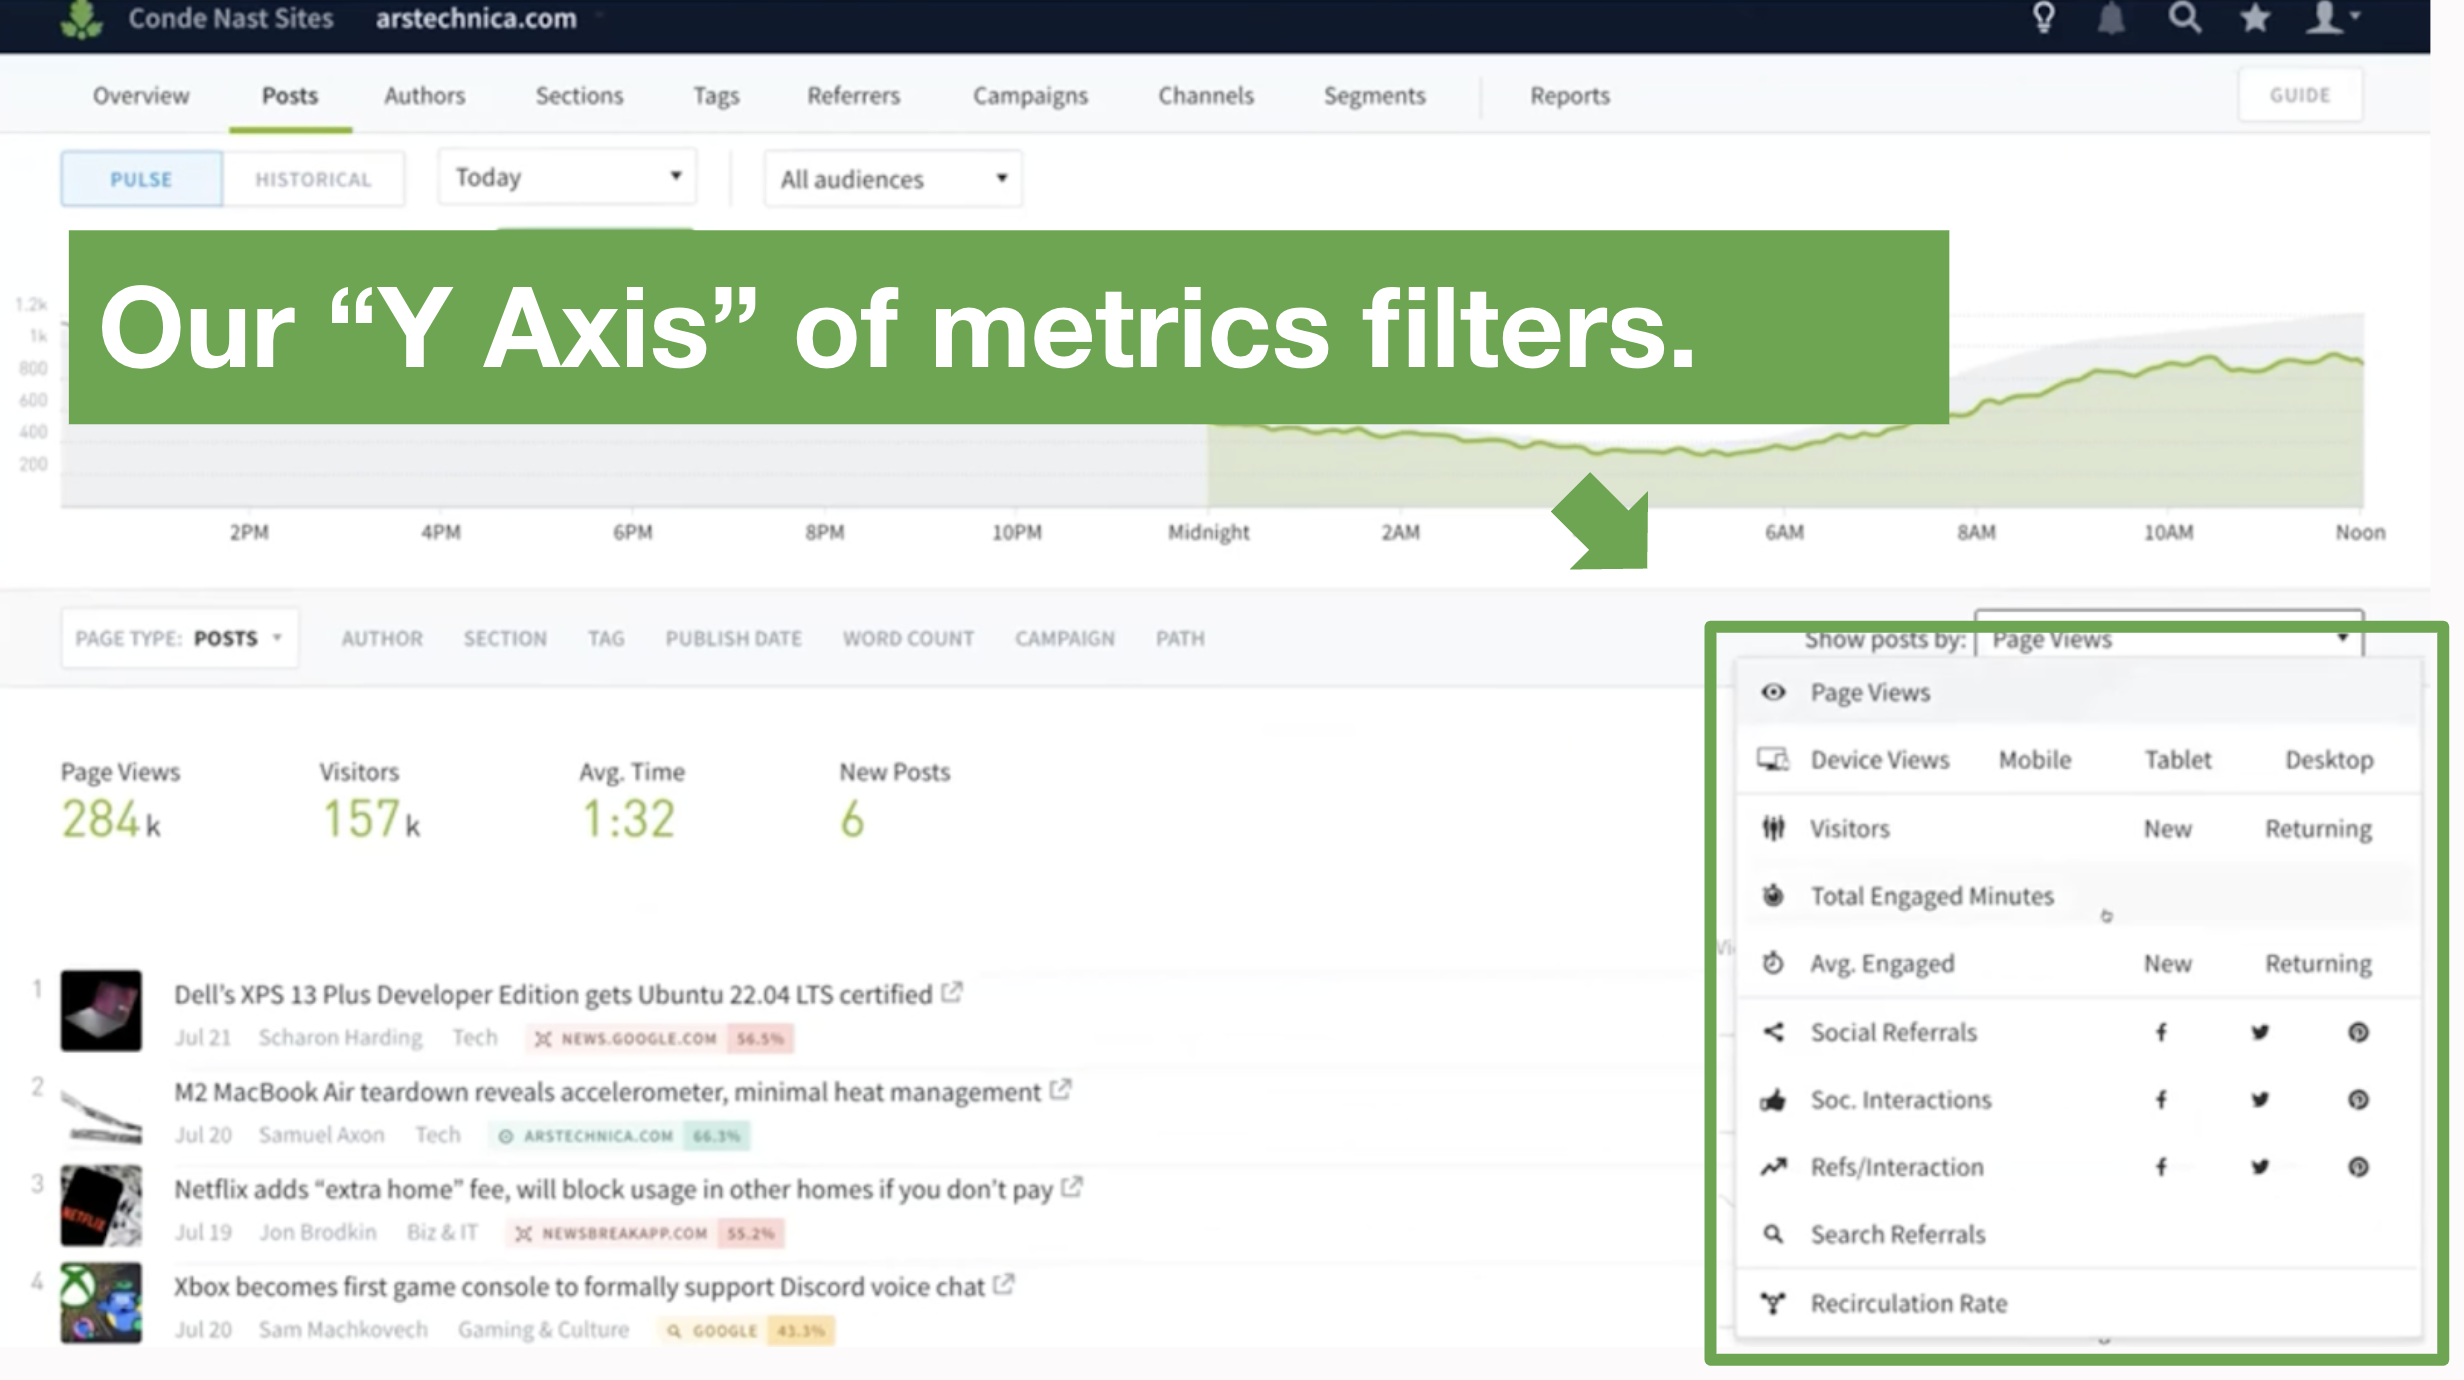 Parse.ly's "Y axis" of metrics filters.